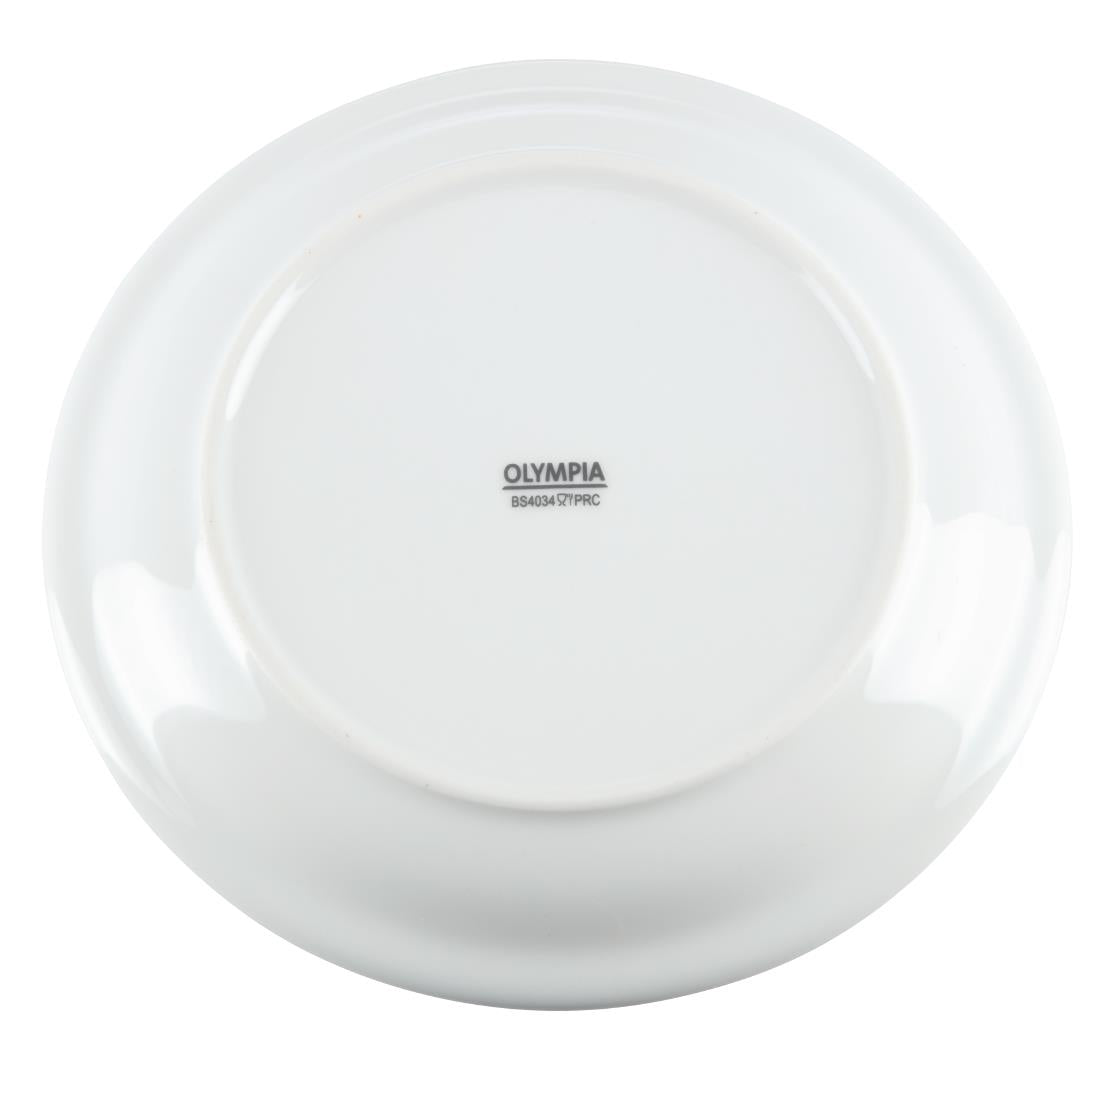 CB487 Olympia Whiteware Narrow Rimmed Plates 180mm (Pack of 12)